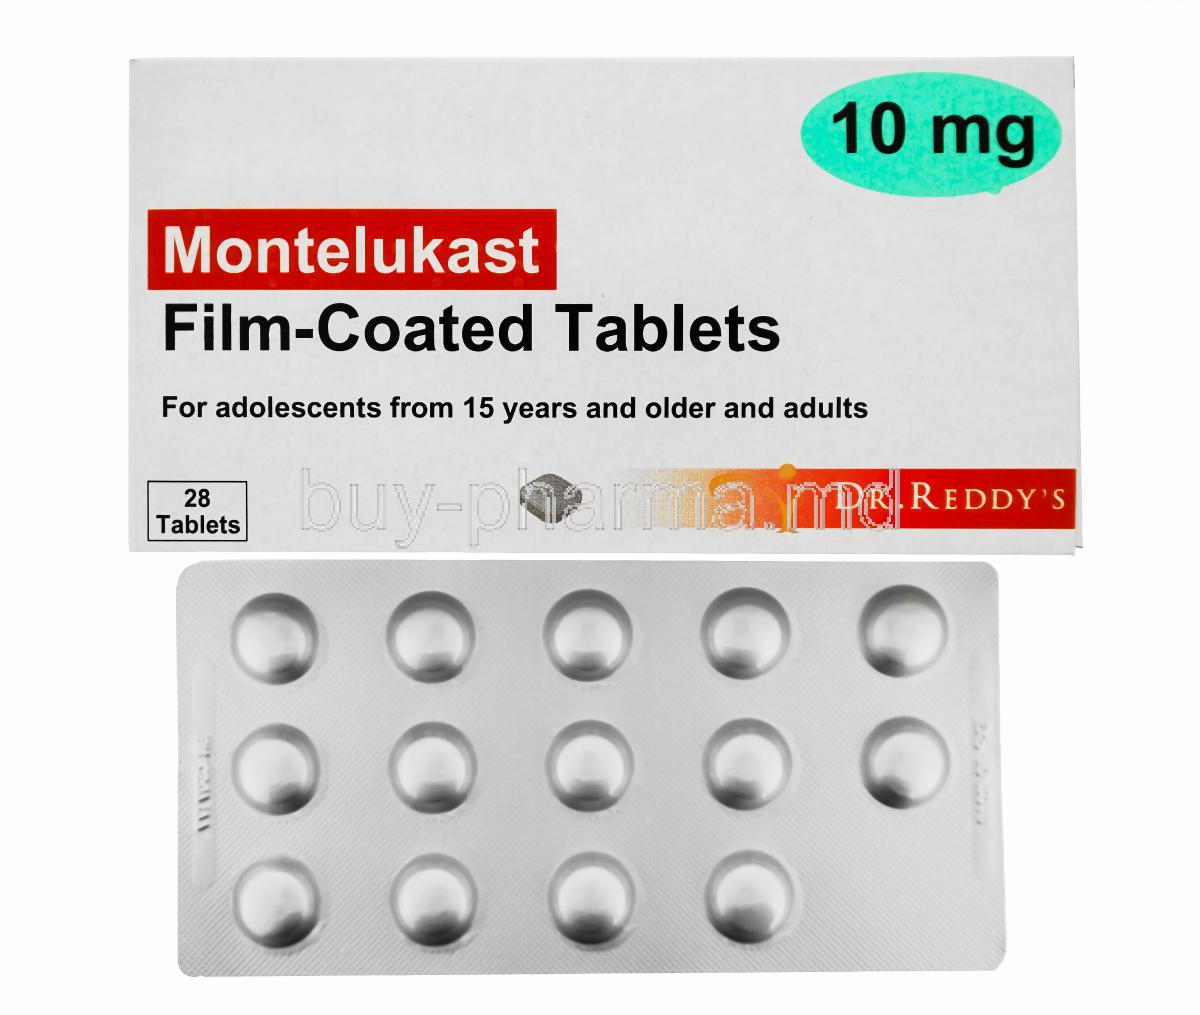 Generic  Singulair, Montelukast Tablet Dr Reddy's, 10mg 28tabs, Film Coated Tabs, Box front view and strip